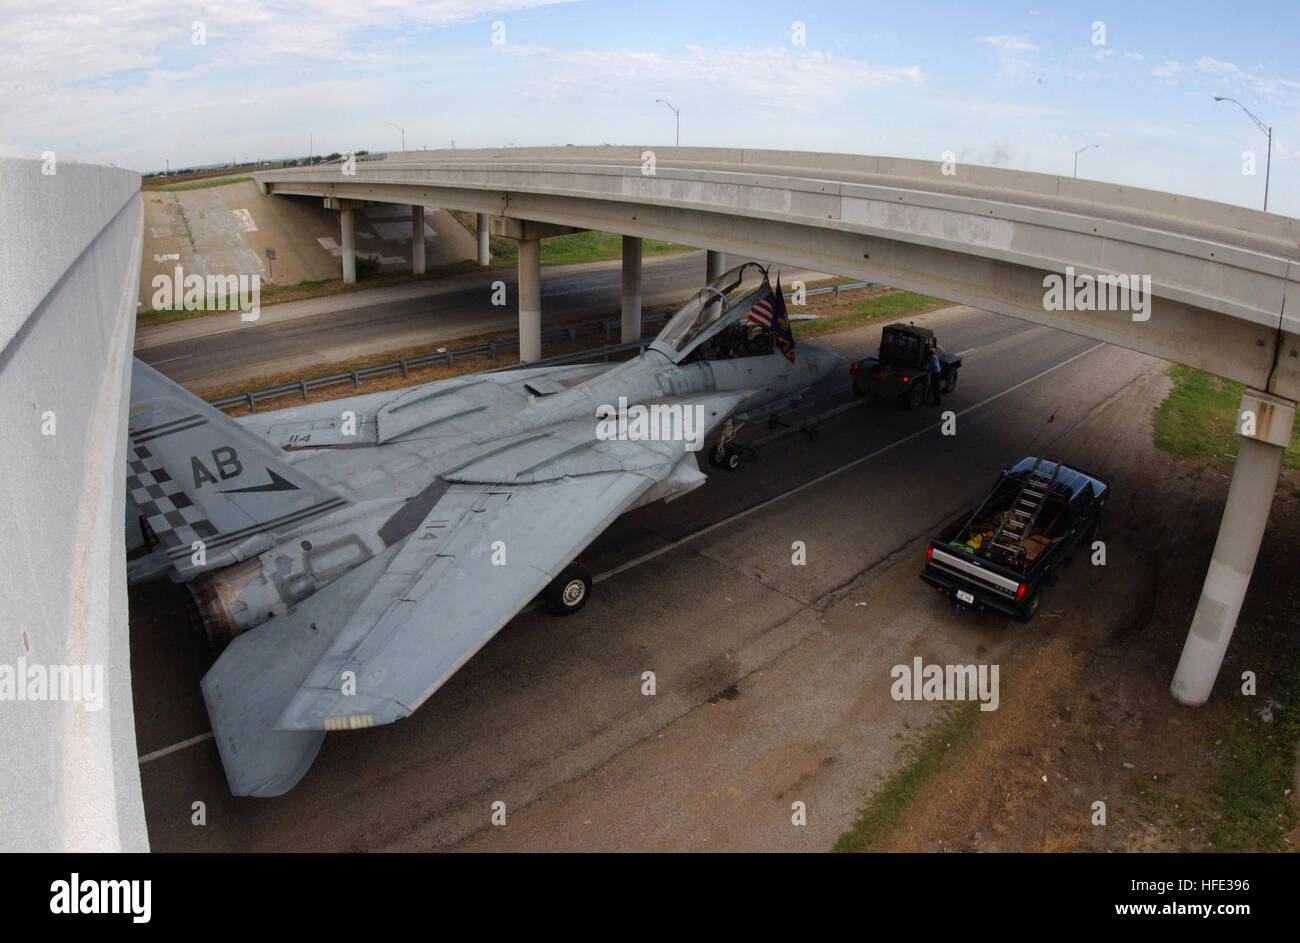 Only clearing the 16 foot clearance of an overpass by a few inches, an F-14A Tomcat finishes the last stretch of the 19.5 miles from San Angelo Regional Airport to Goodfellow Air Force Base Texas at a rate of 5 MPH after being decommissioned by the Navy.  This F-14A was the first F-14A to be decommissioned by the Navy and was bought by Goodfellow AFB for $20,000 to be used for training by the 312th Training Squadron's Fire Training Academy.  The plane's engines, weapons, and related systems had to be removed before transport to Goodfellow AFB and a few safety alterations will have to be made f Stock Photo